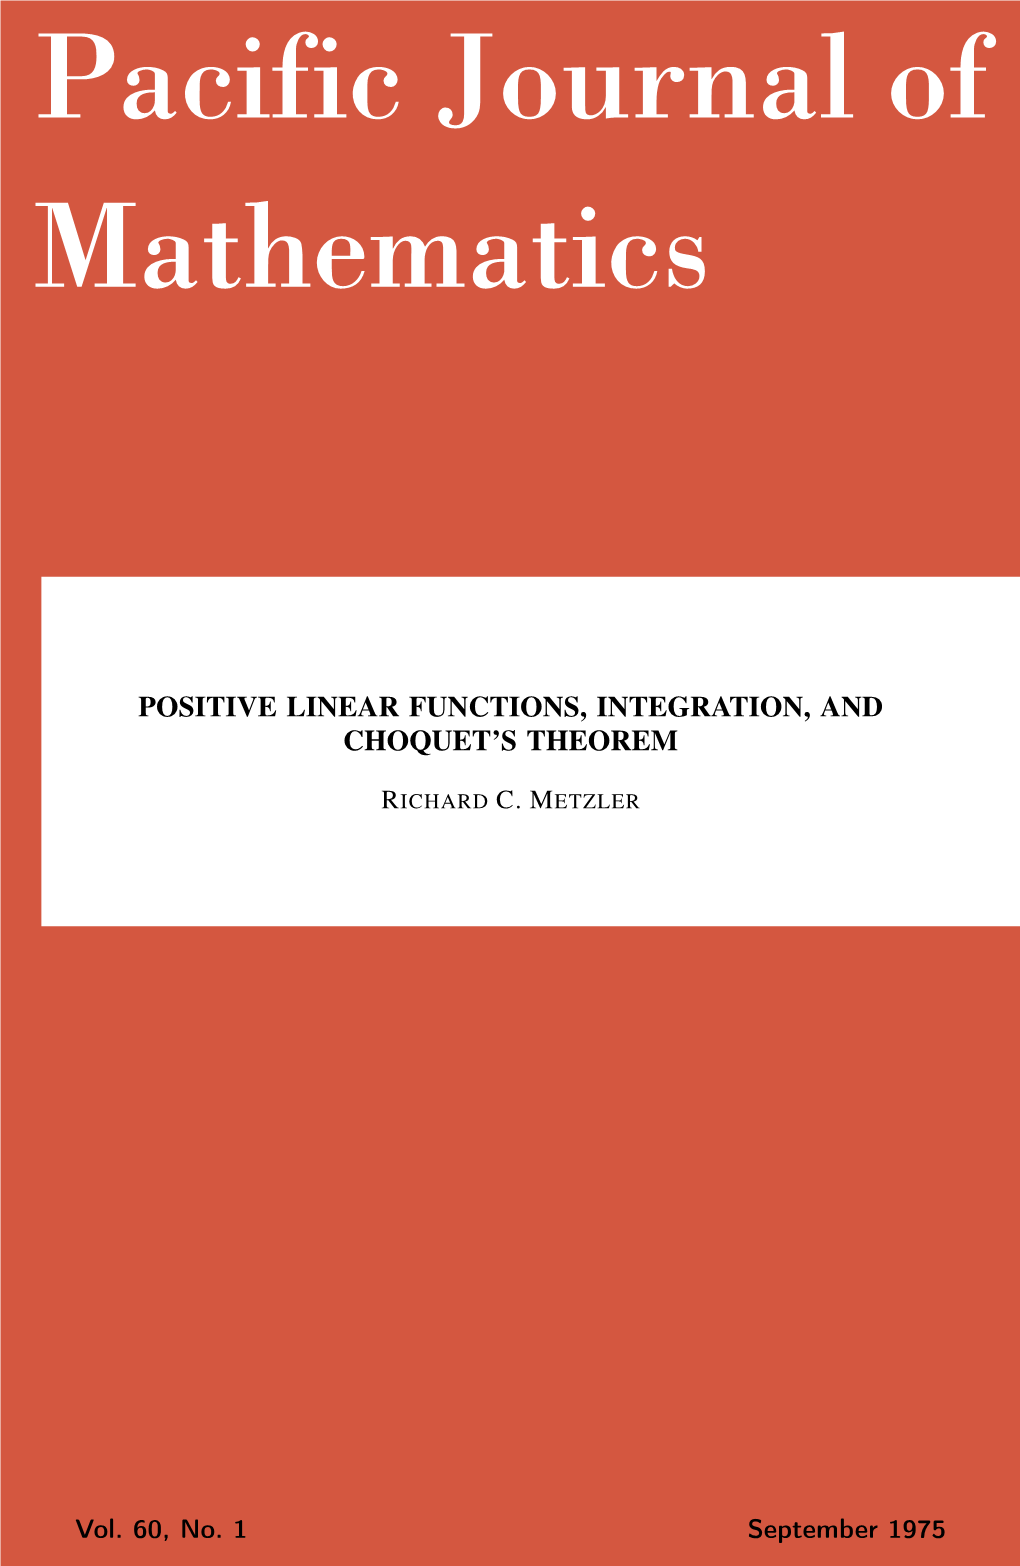 Positive Linear Functions, Integration, and Choquet's Theorem